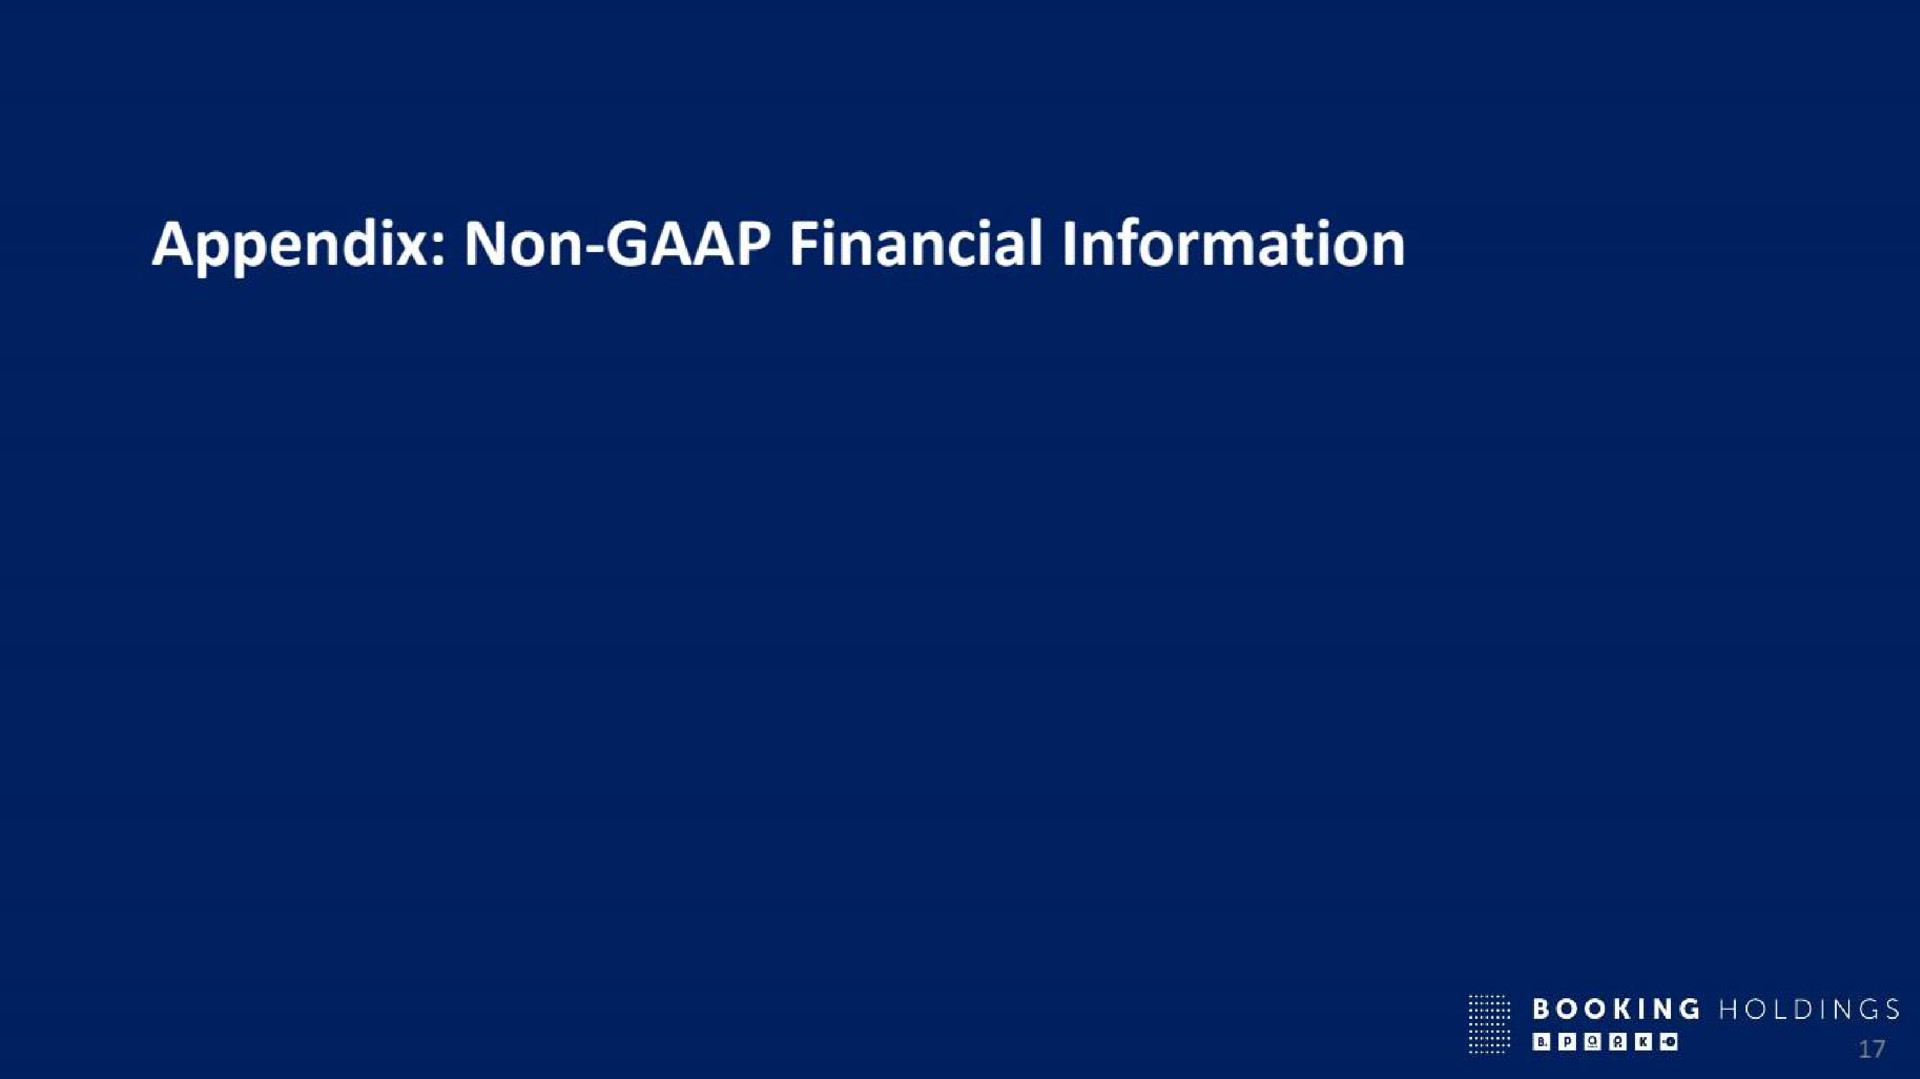 appendix non financial information | Booking Holdings